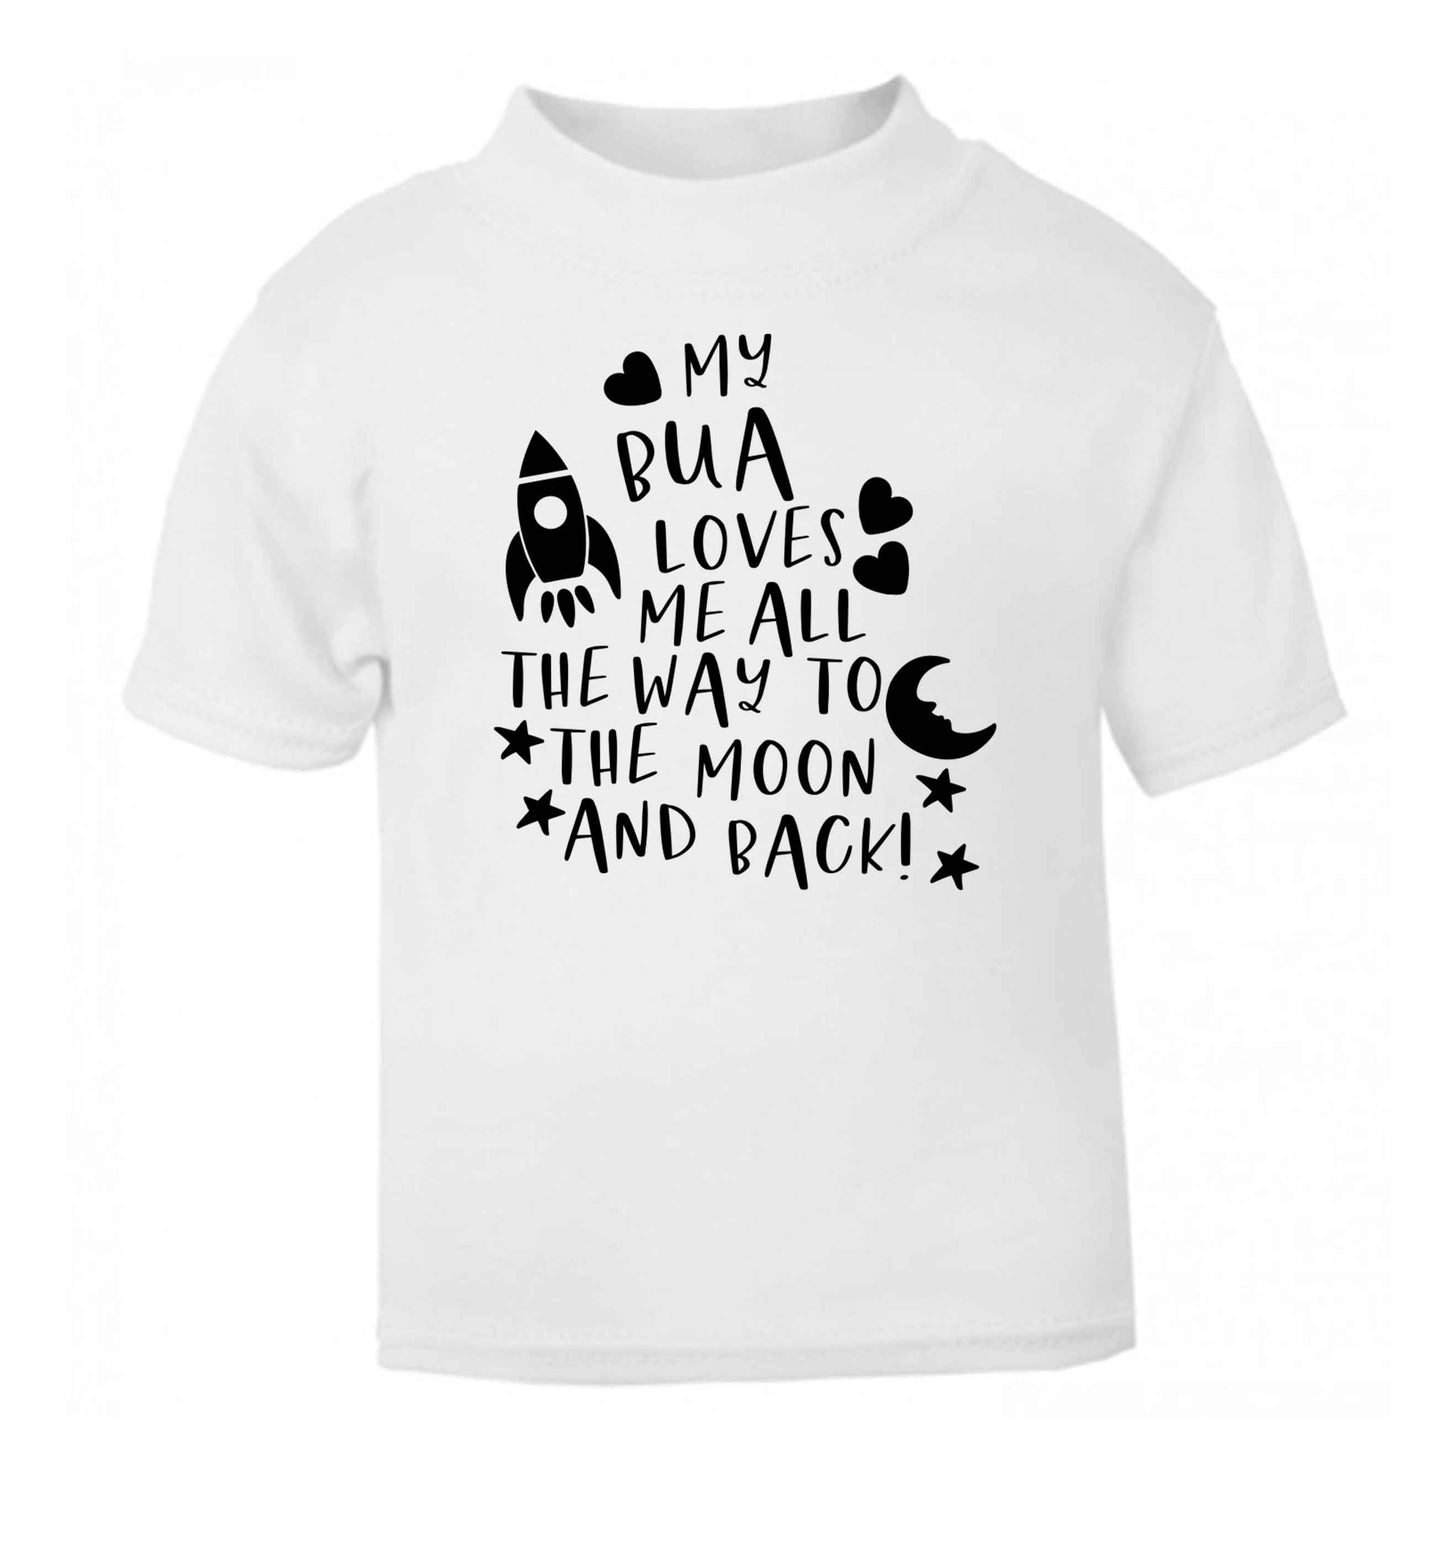 My bua loves me all they way to the moon and back white Baby Toddler Tshirt 2 Years